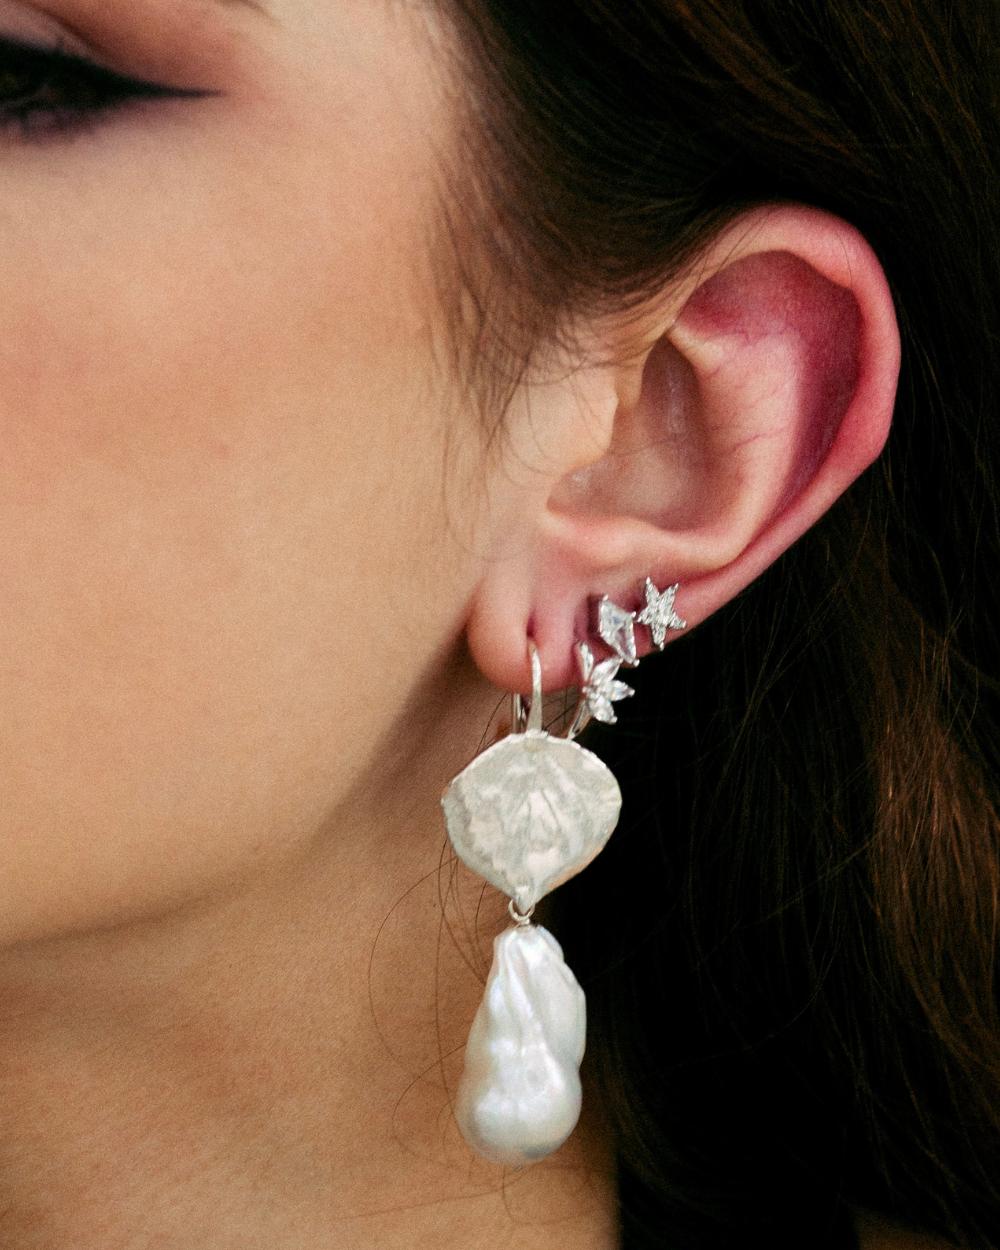 Model wearing a silver earring stack with diamond simulants.